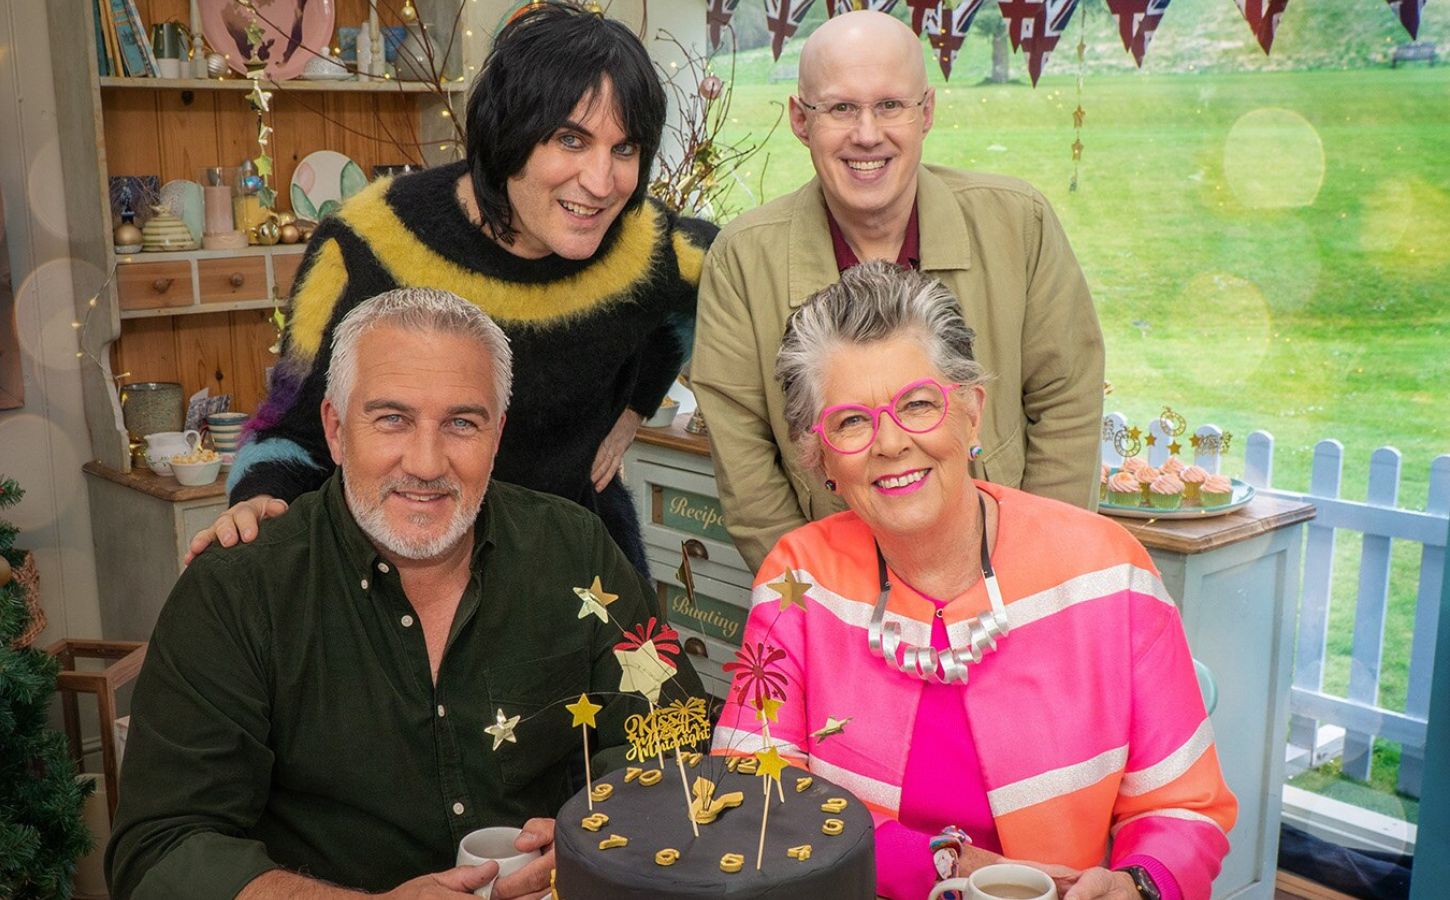 The Great British Bake Off judges Paul Hollywood and Prue Leith sitting in front of hosts Noel Fielding and Matt Lucas